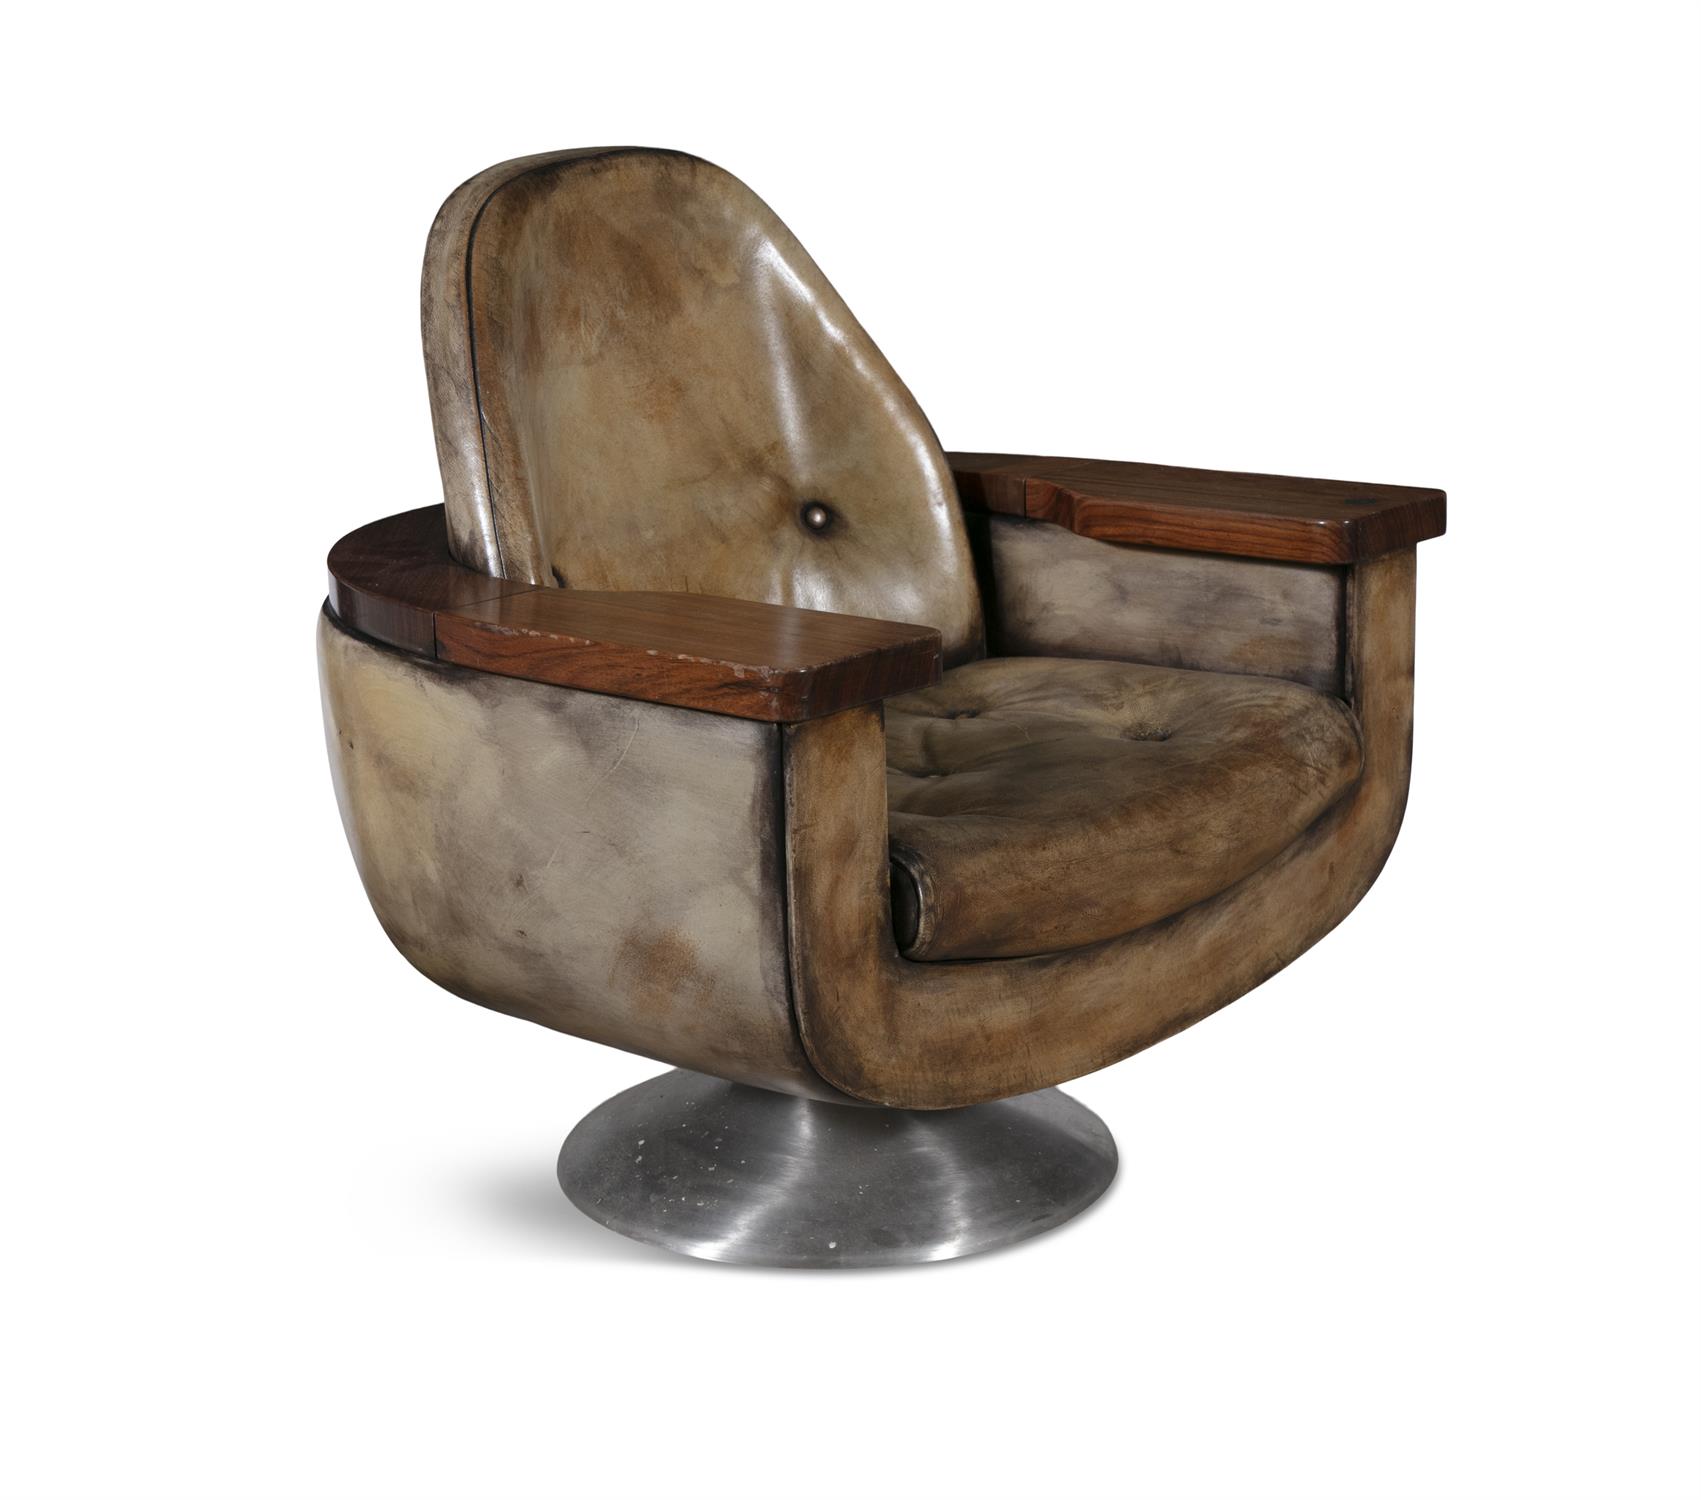 PETER HOYTE A pair of armchairs by Peter Hoyte in rosewood and leather, on a brushed aluminium - Image 5 of 9